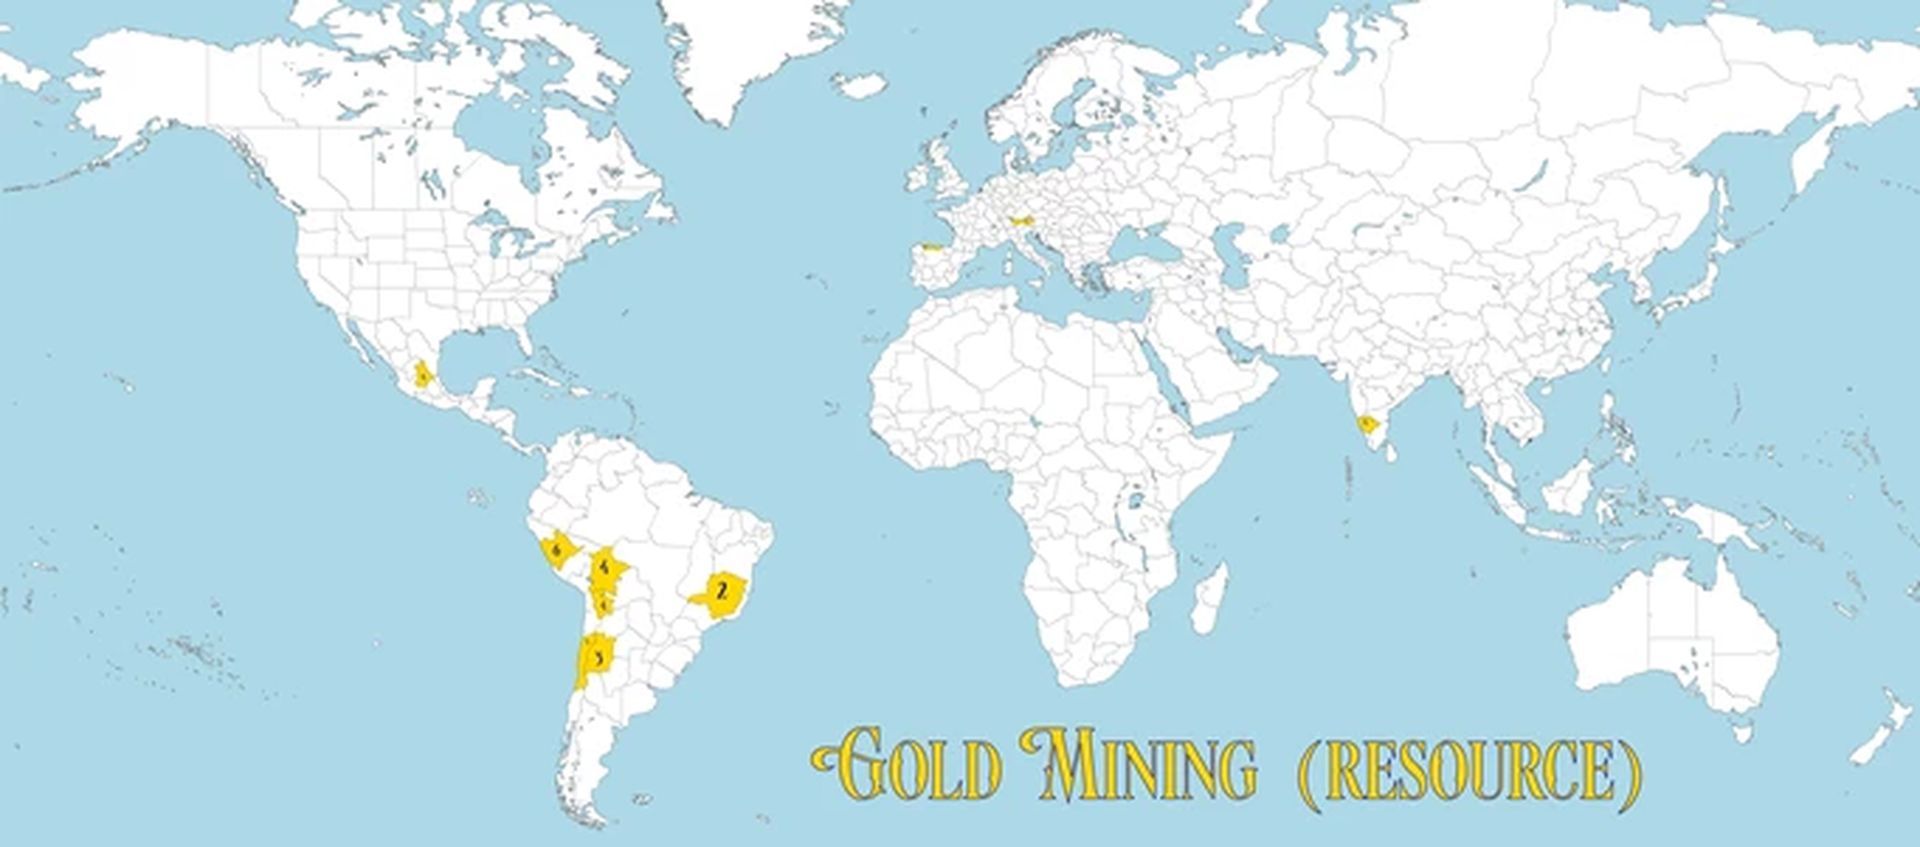 Victoria 3 gold mines: Locations and how to manage them?